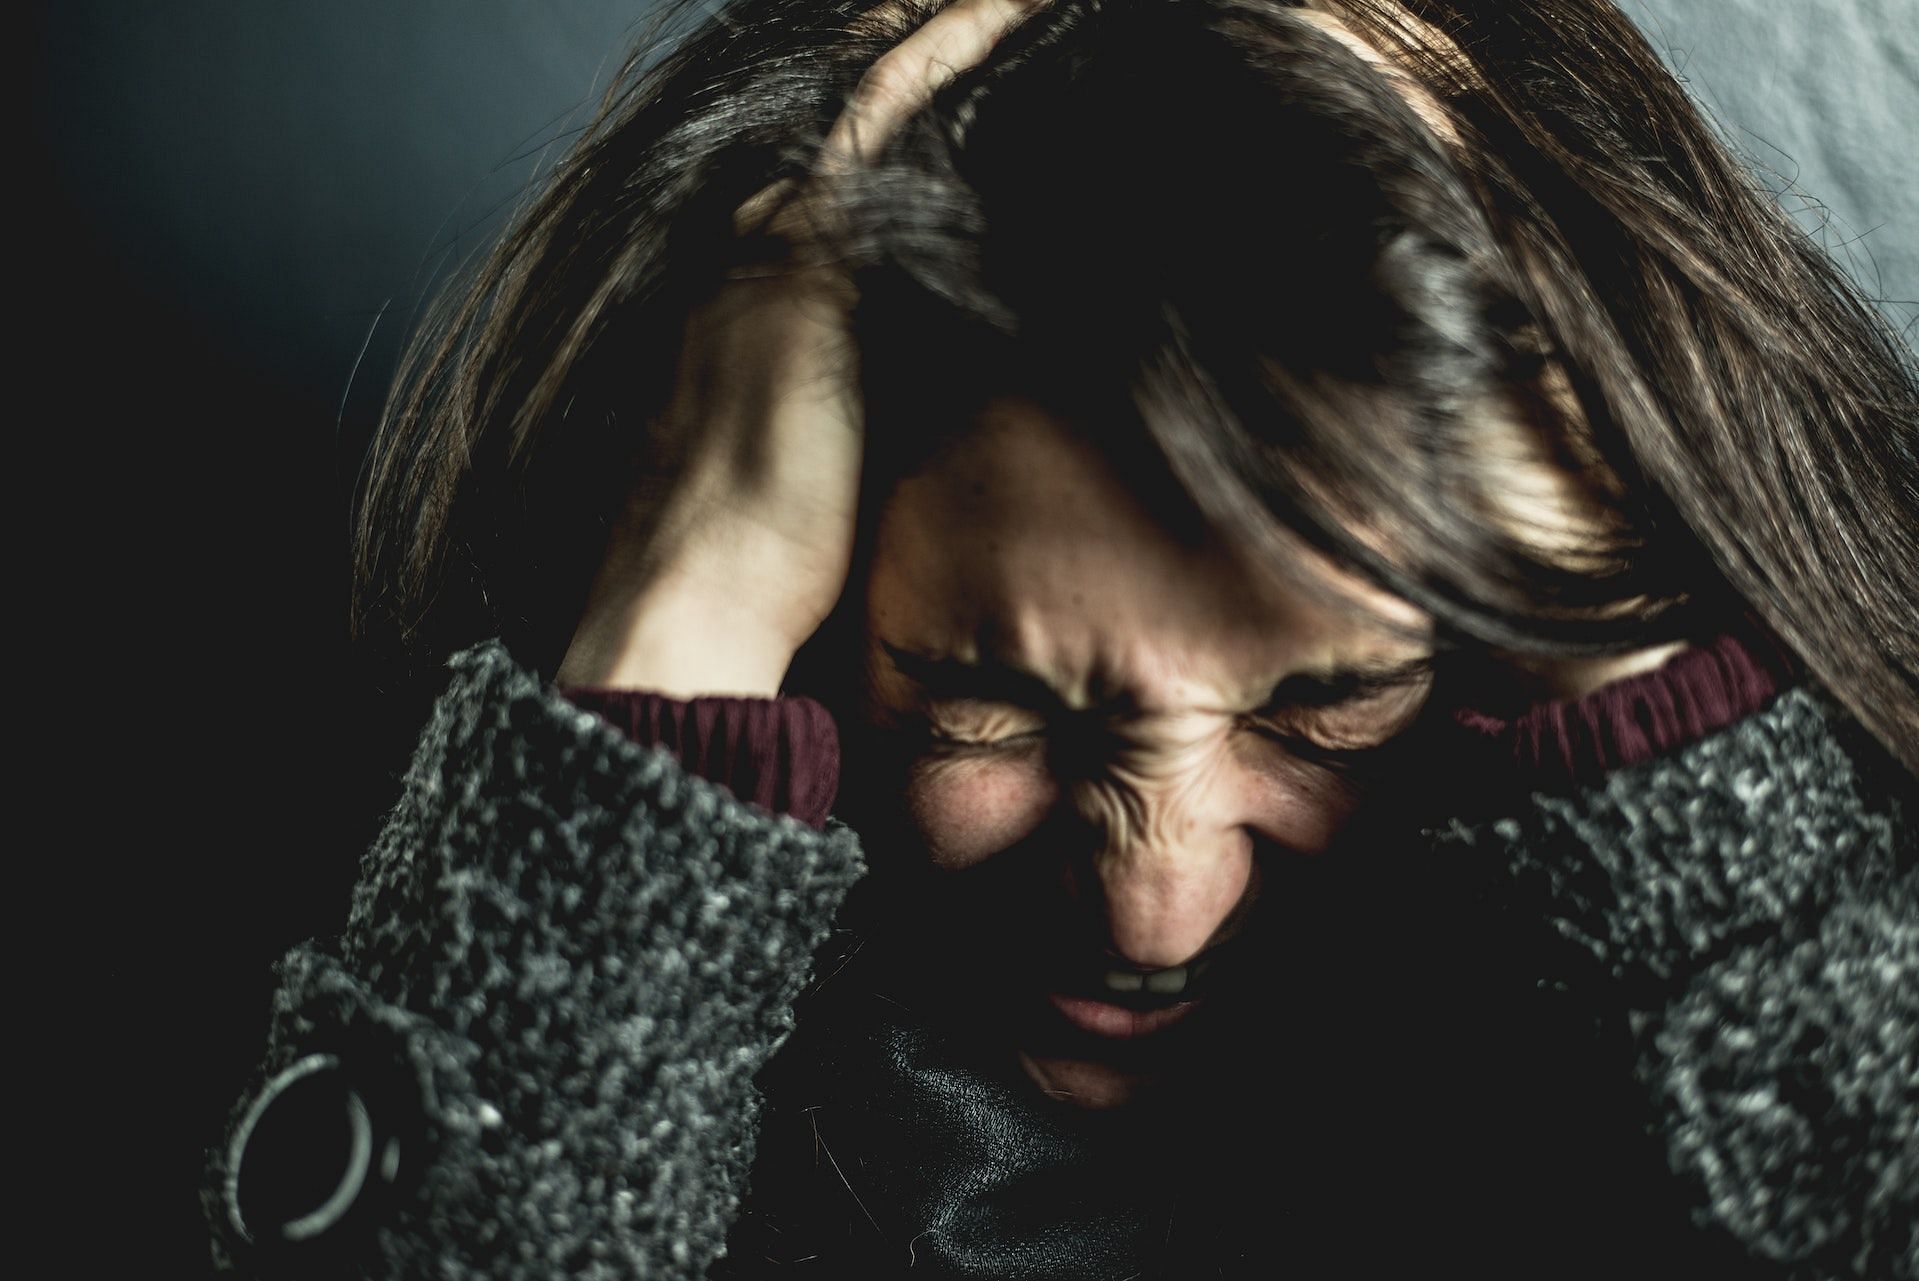 A cluster headache is one of the most painful types of headaches.  (Photo via Pexels/David Garrison)